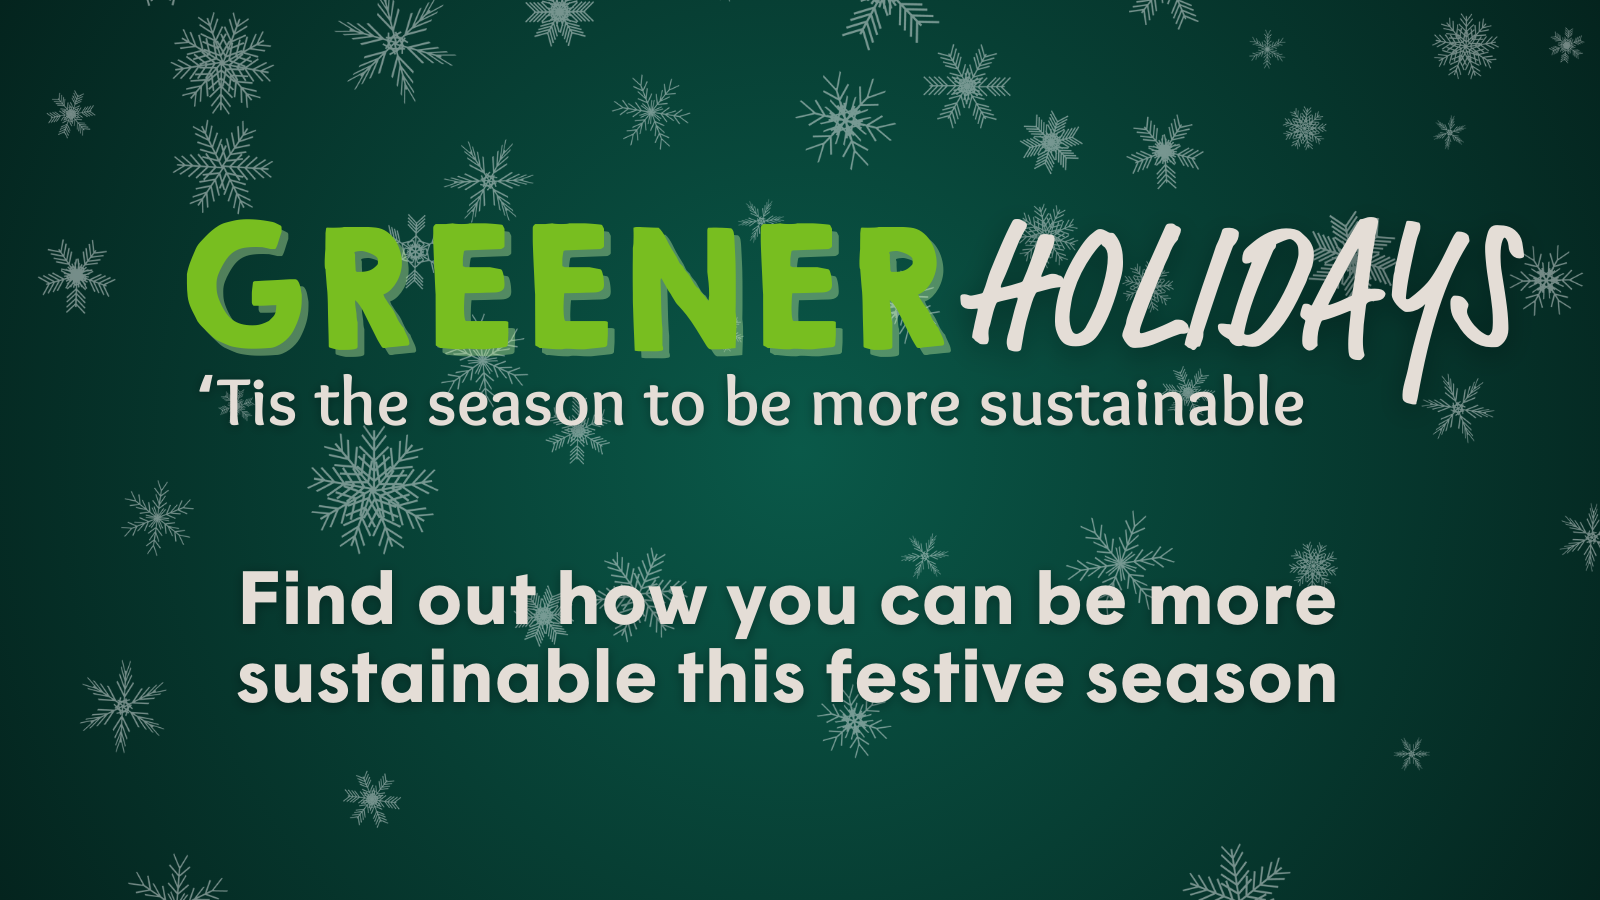 Greener Holiday: be more sustainable this festive season